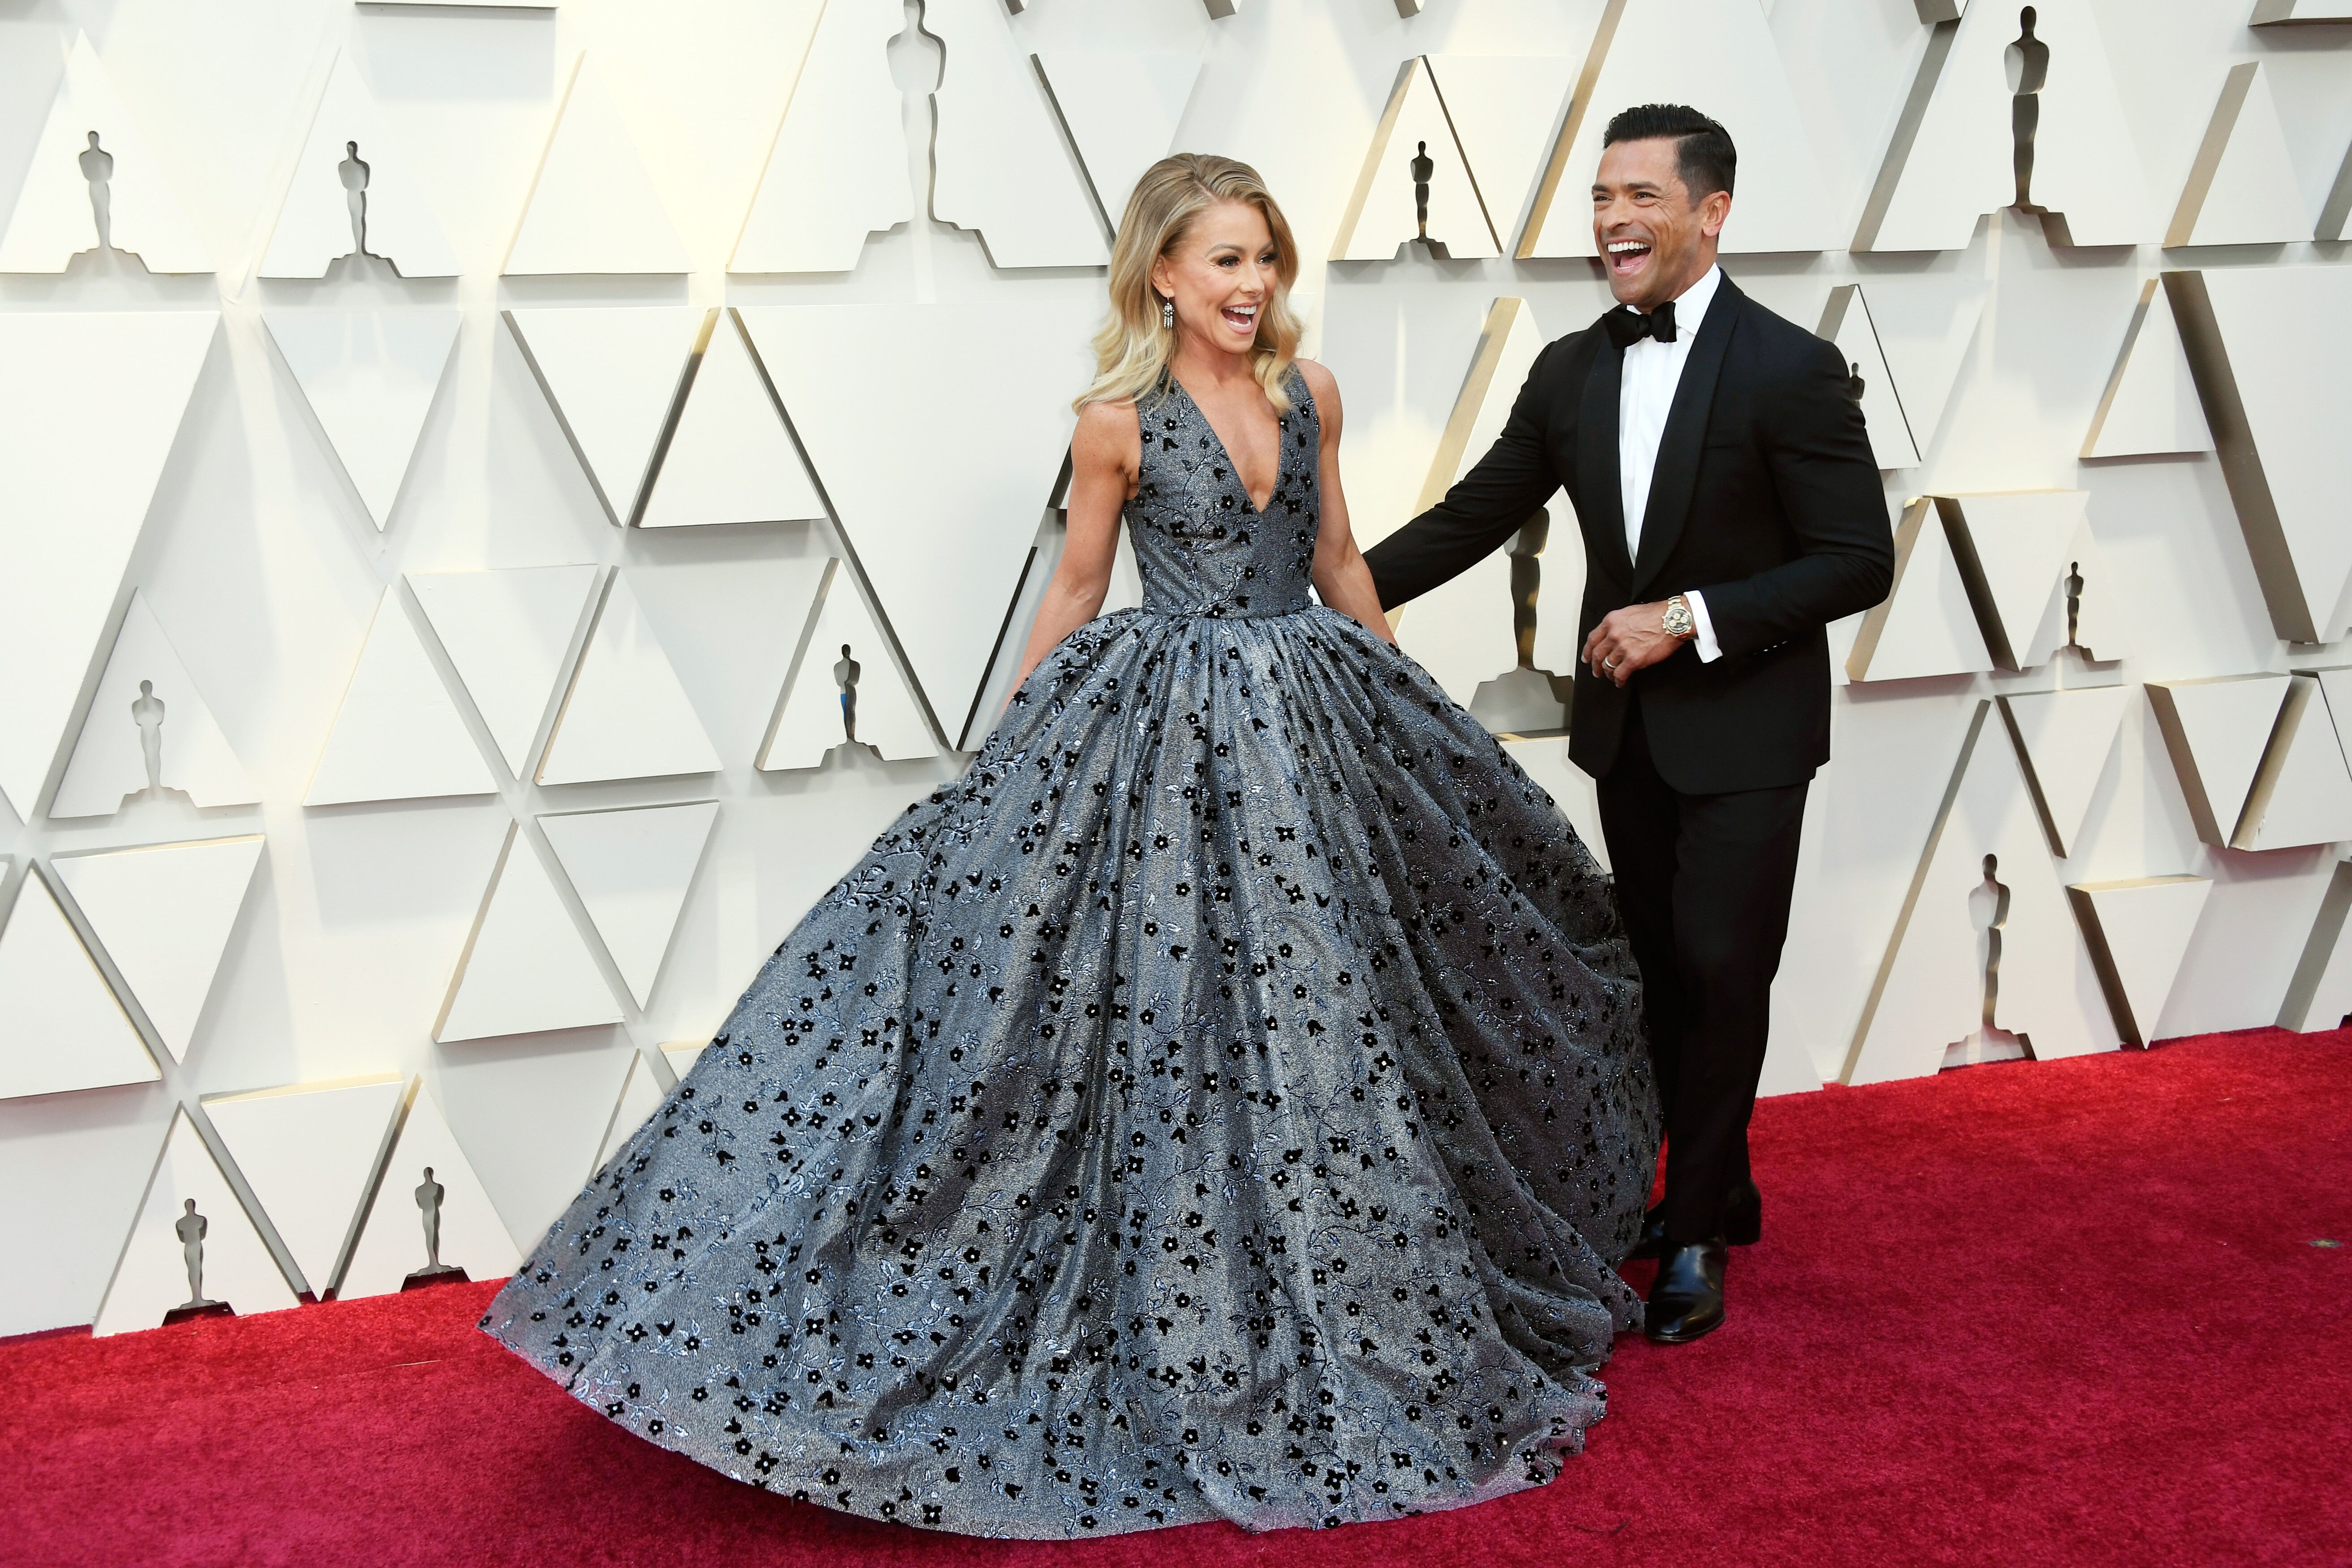  Kelly Ripa and Mark Consuelos attend the 91st Annual Academy Awards at Hollywood and Highland on February 24, 2019 in Hollywood, California. | Source: Getty Images